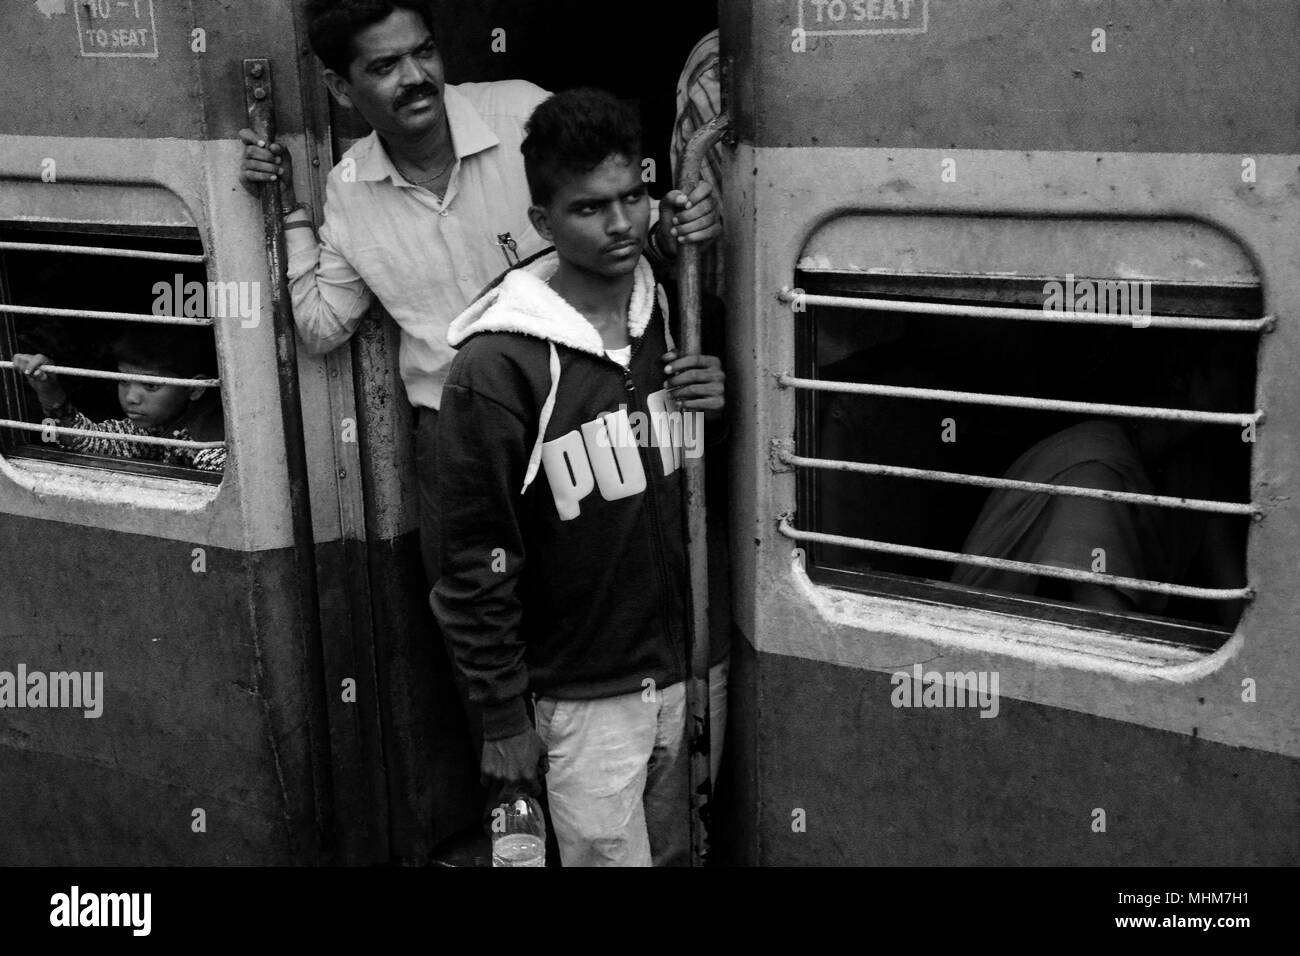 Two men dangerously hanging out of the train door in anticipation of their arrival at their destination, India Stock Photo